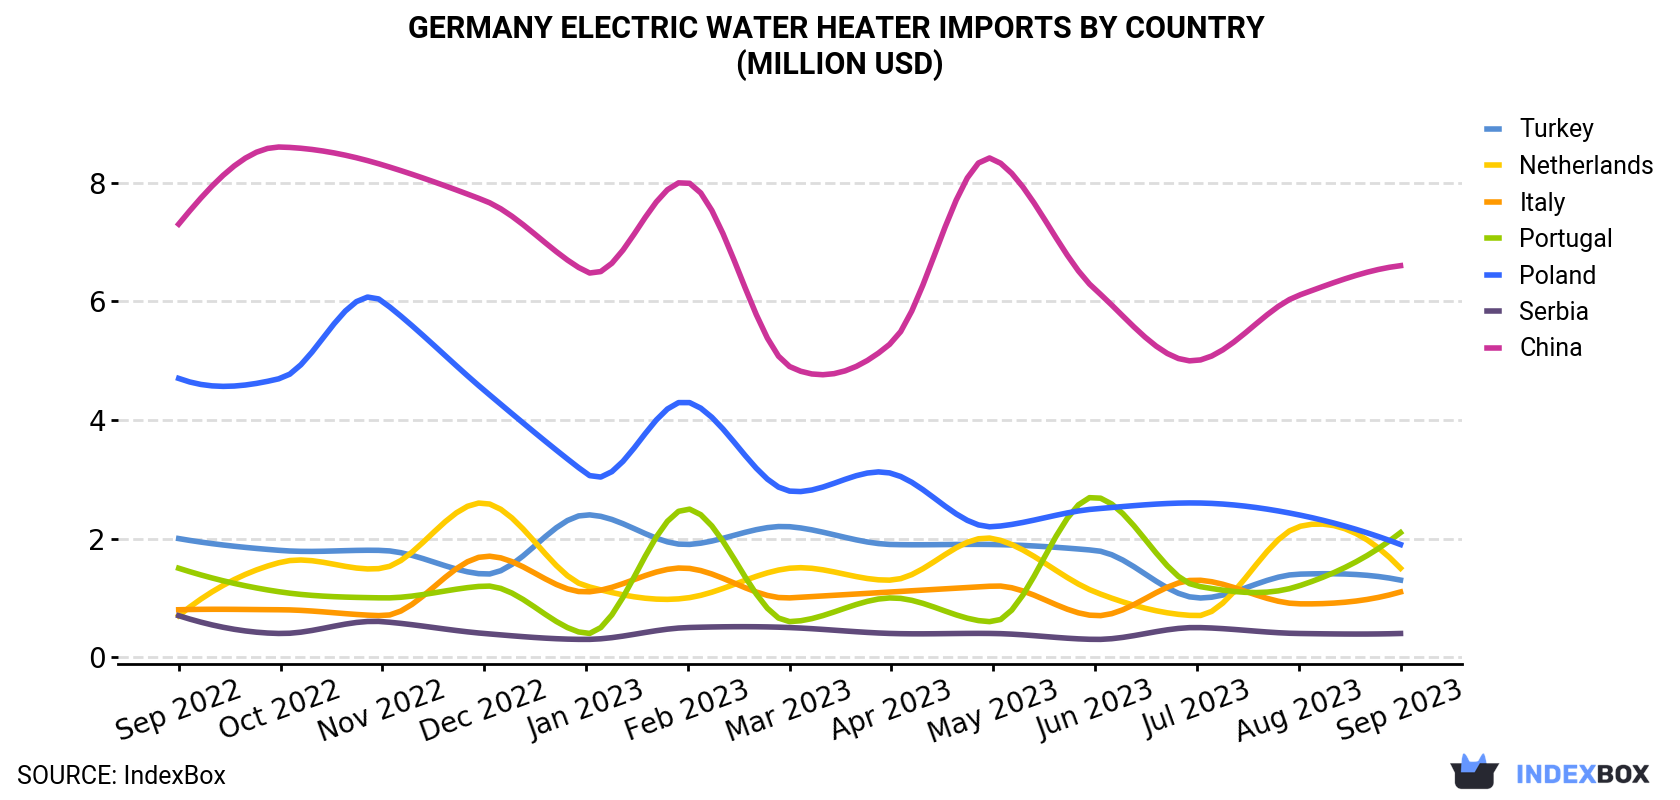 Germany's Imports of Electric Water Heaters Experience Minor Decline to ...